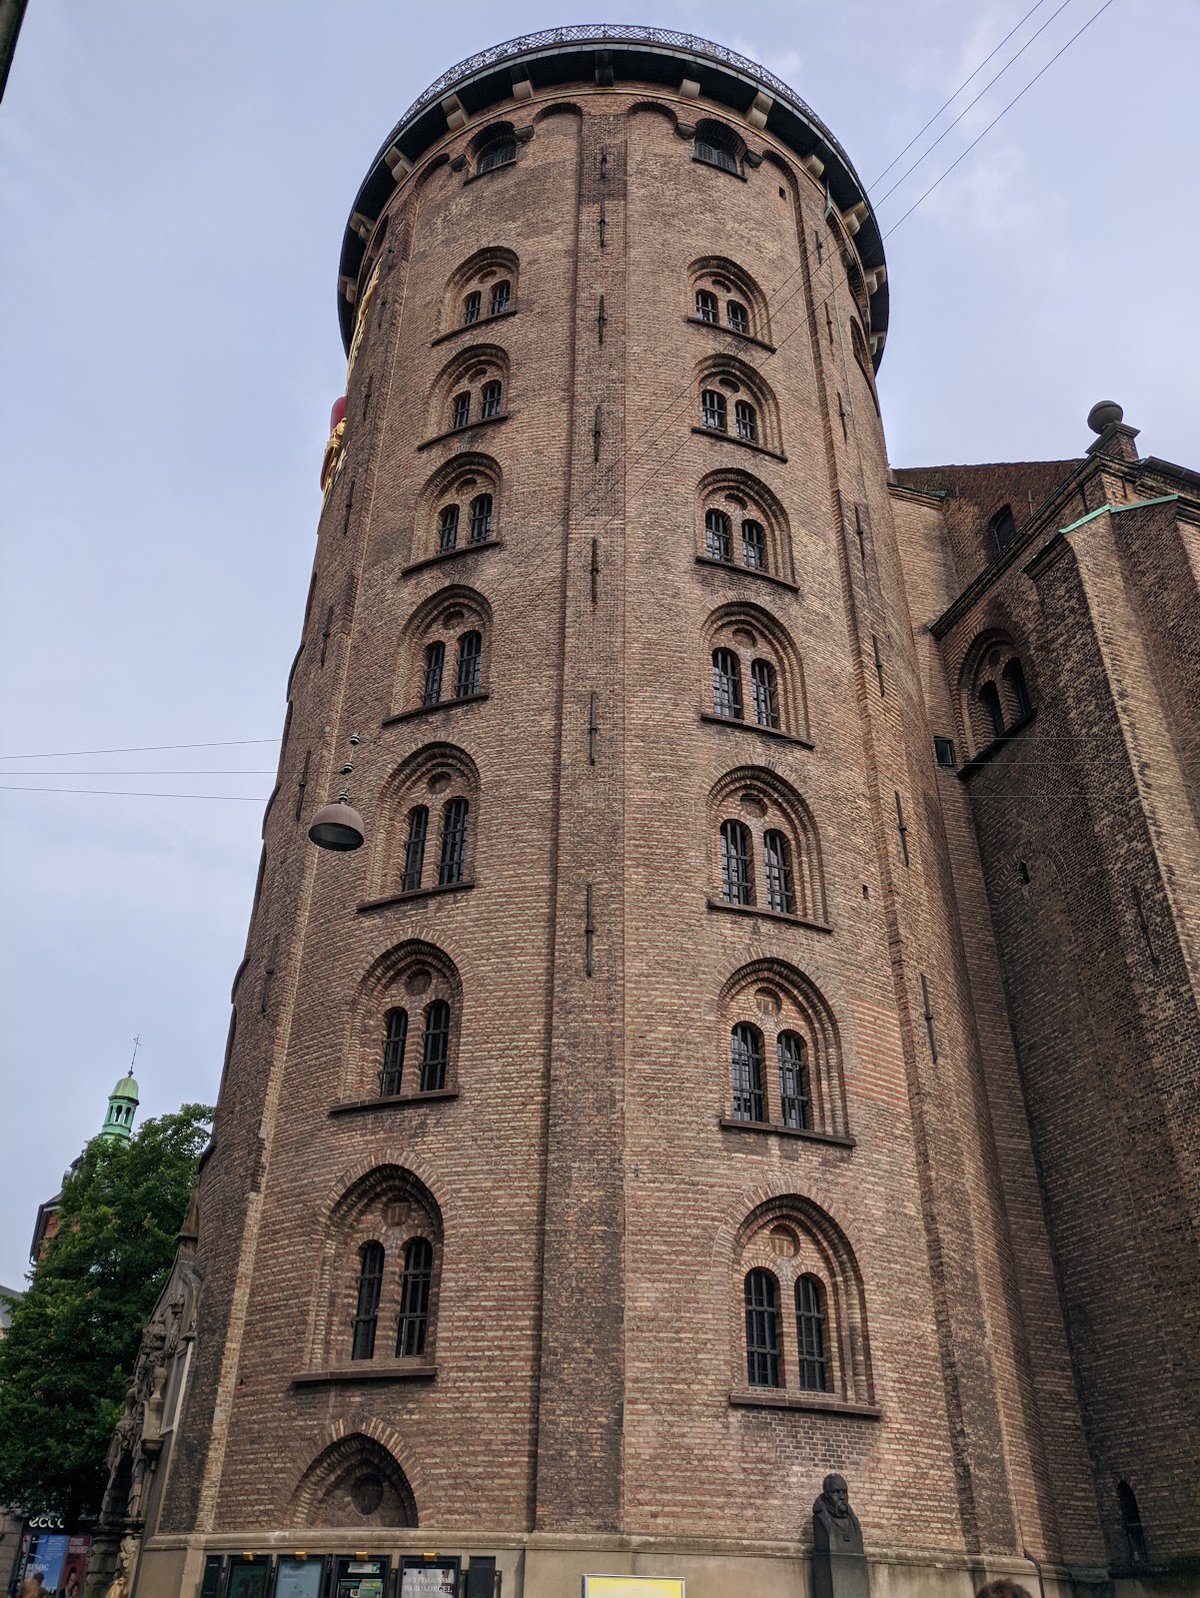 A picture of The Round Tower